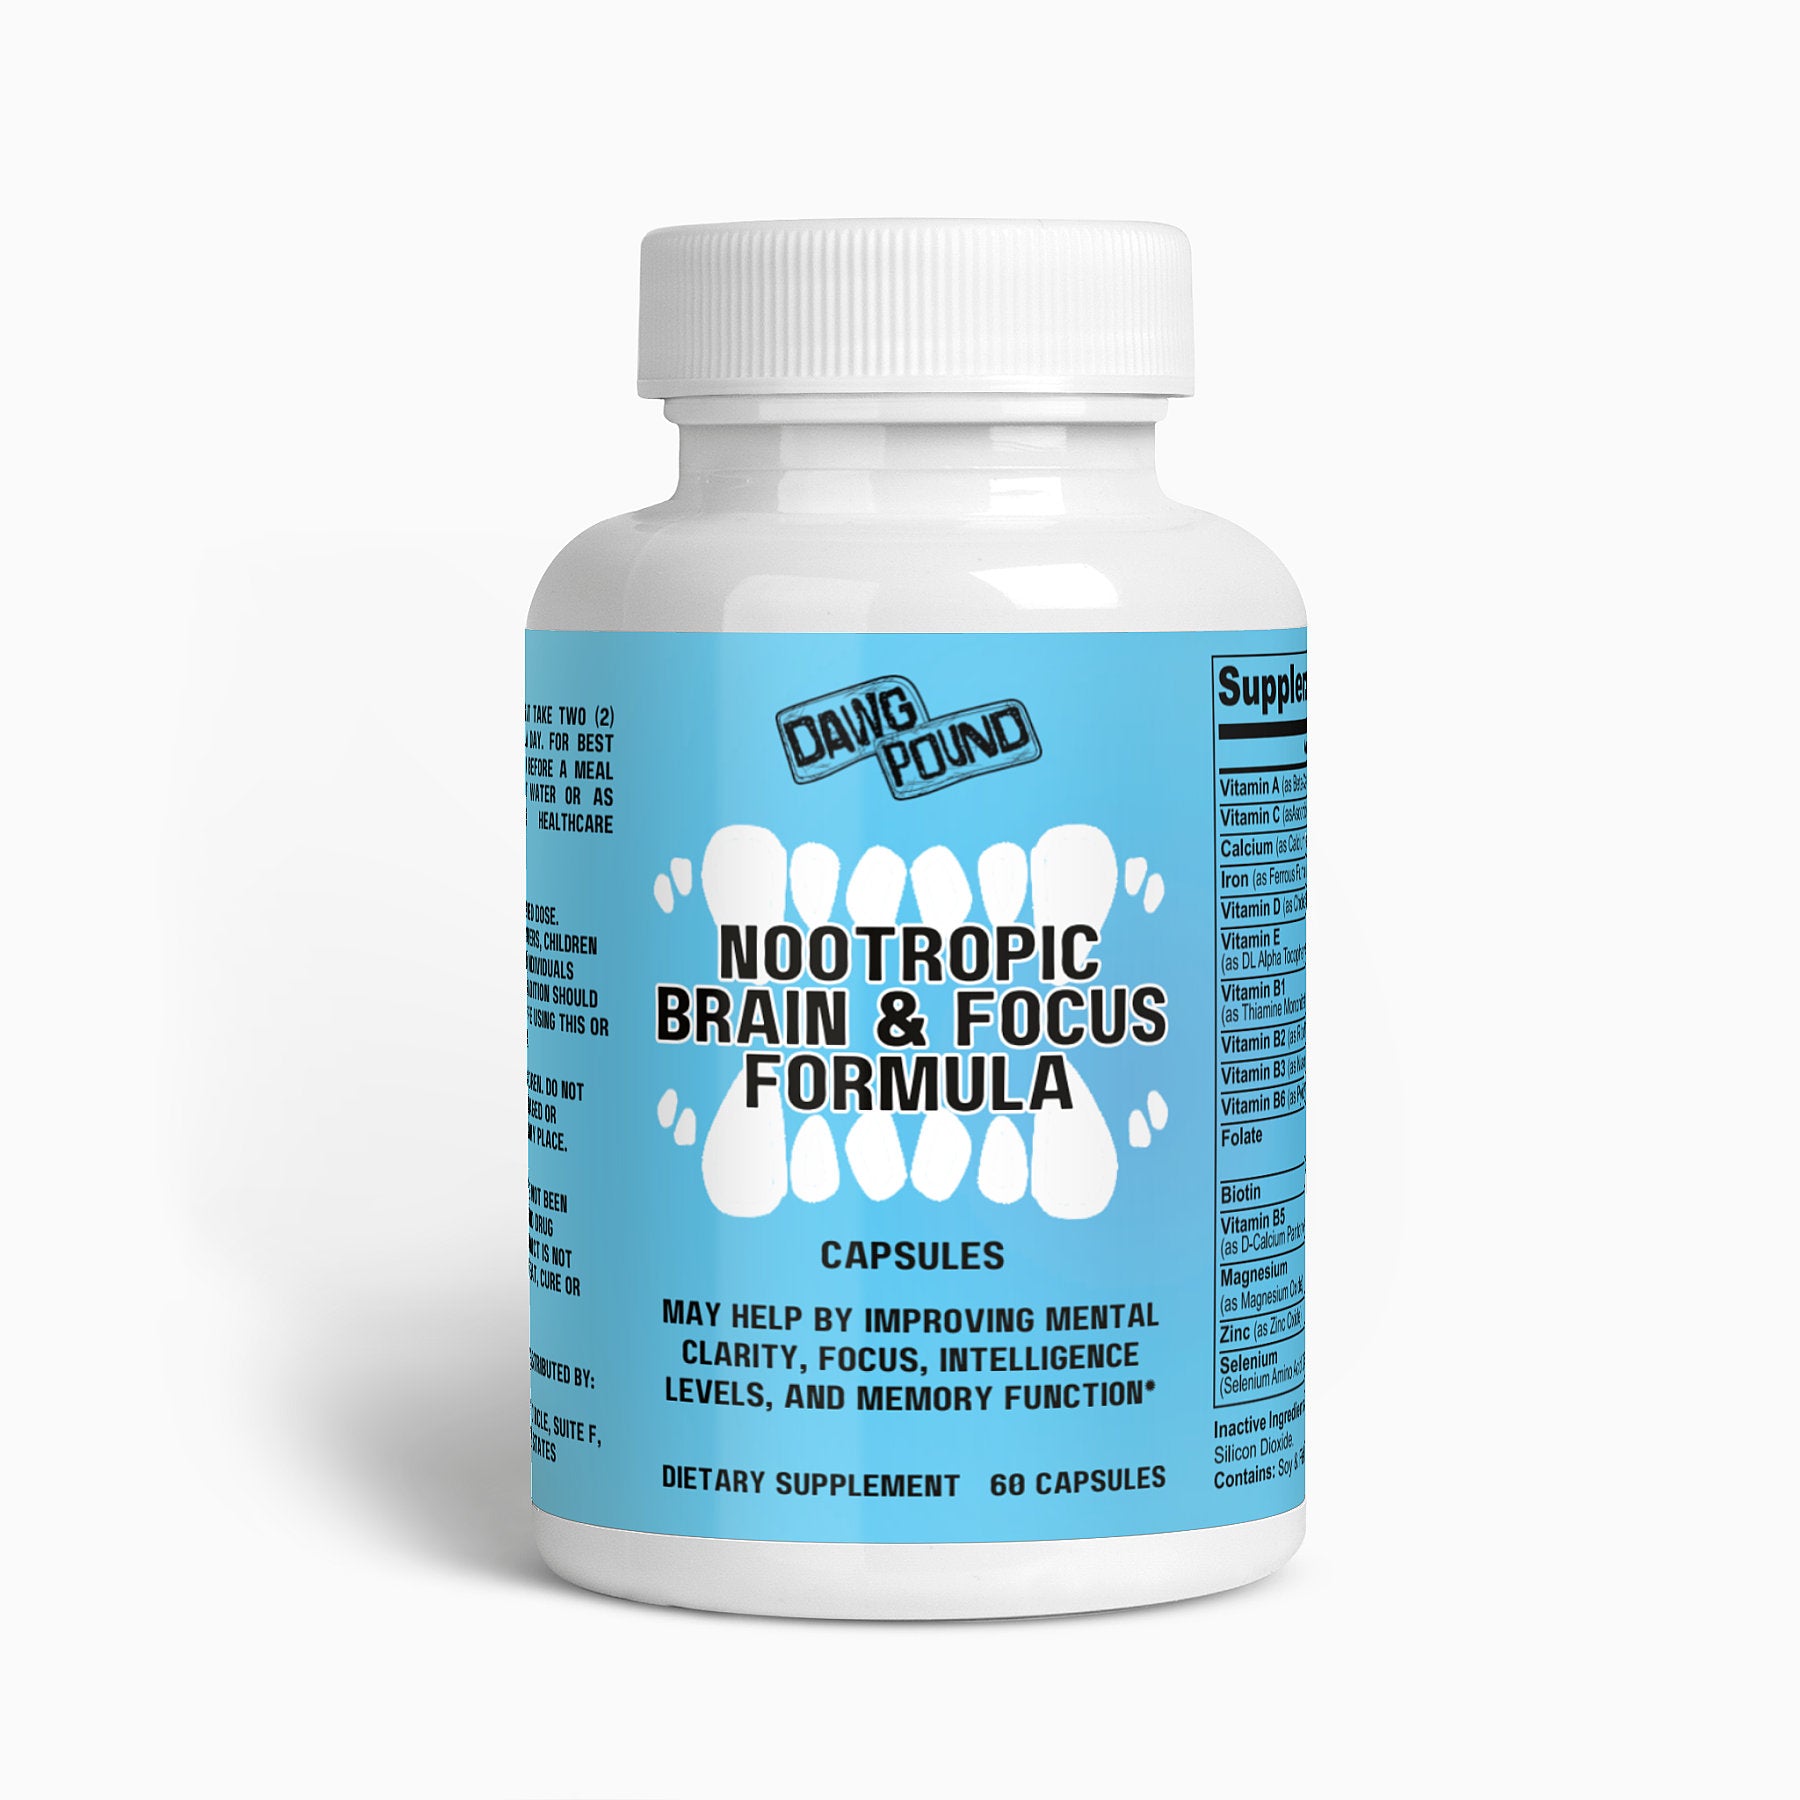 Dawg Pound Nootropic Brain & Focus Formula Supplement Capsules - Front View